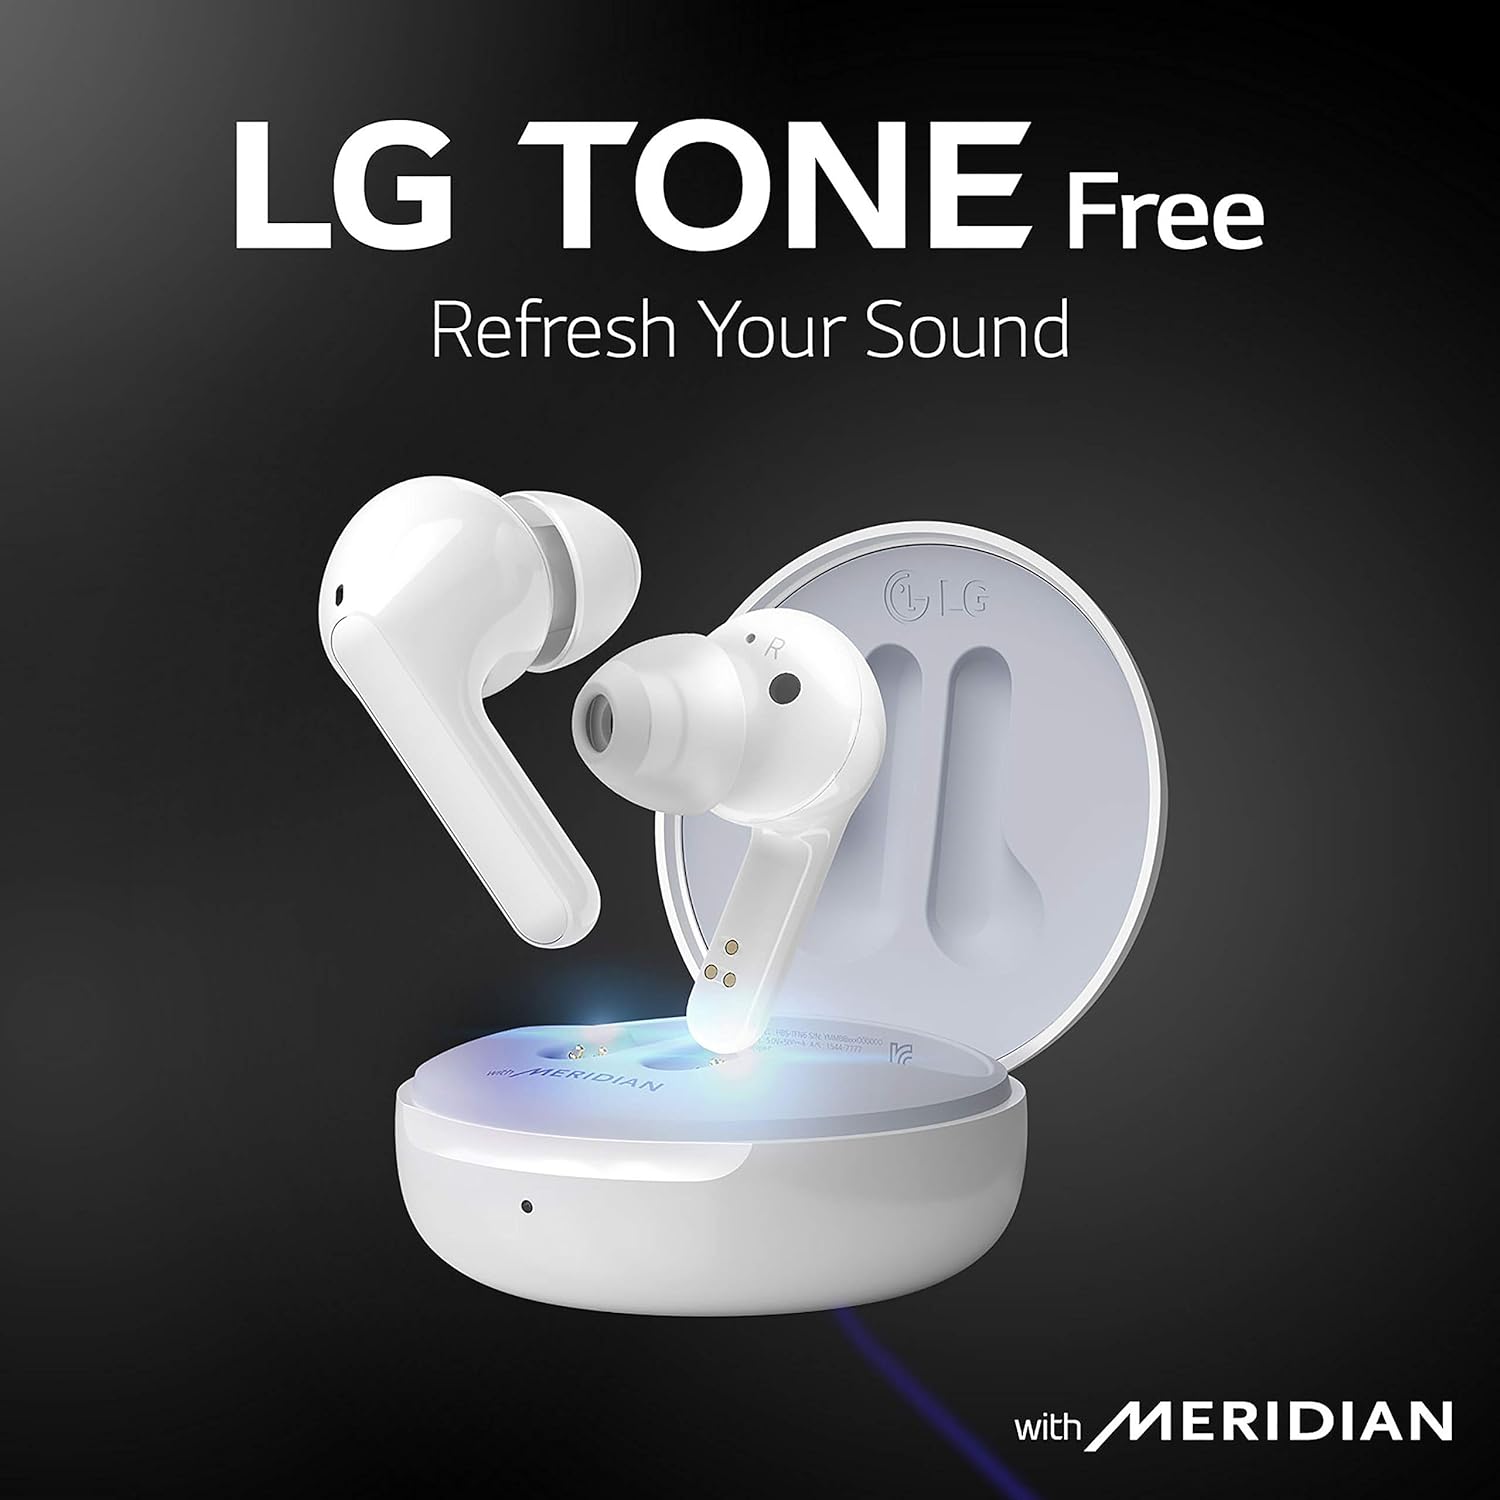 LG TONE Free FN5W - Wireless Charging True Wireless Bluetooth Earbuds with Meridian Sound, Noise Reduction with a close fit, Dual Microphone for Work/Home Office, iPhone and Android Compatible, White